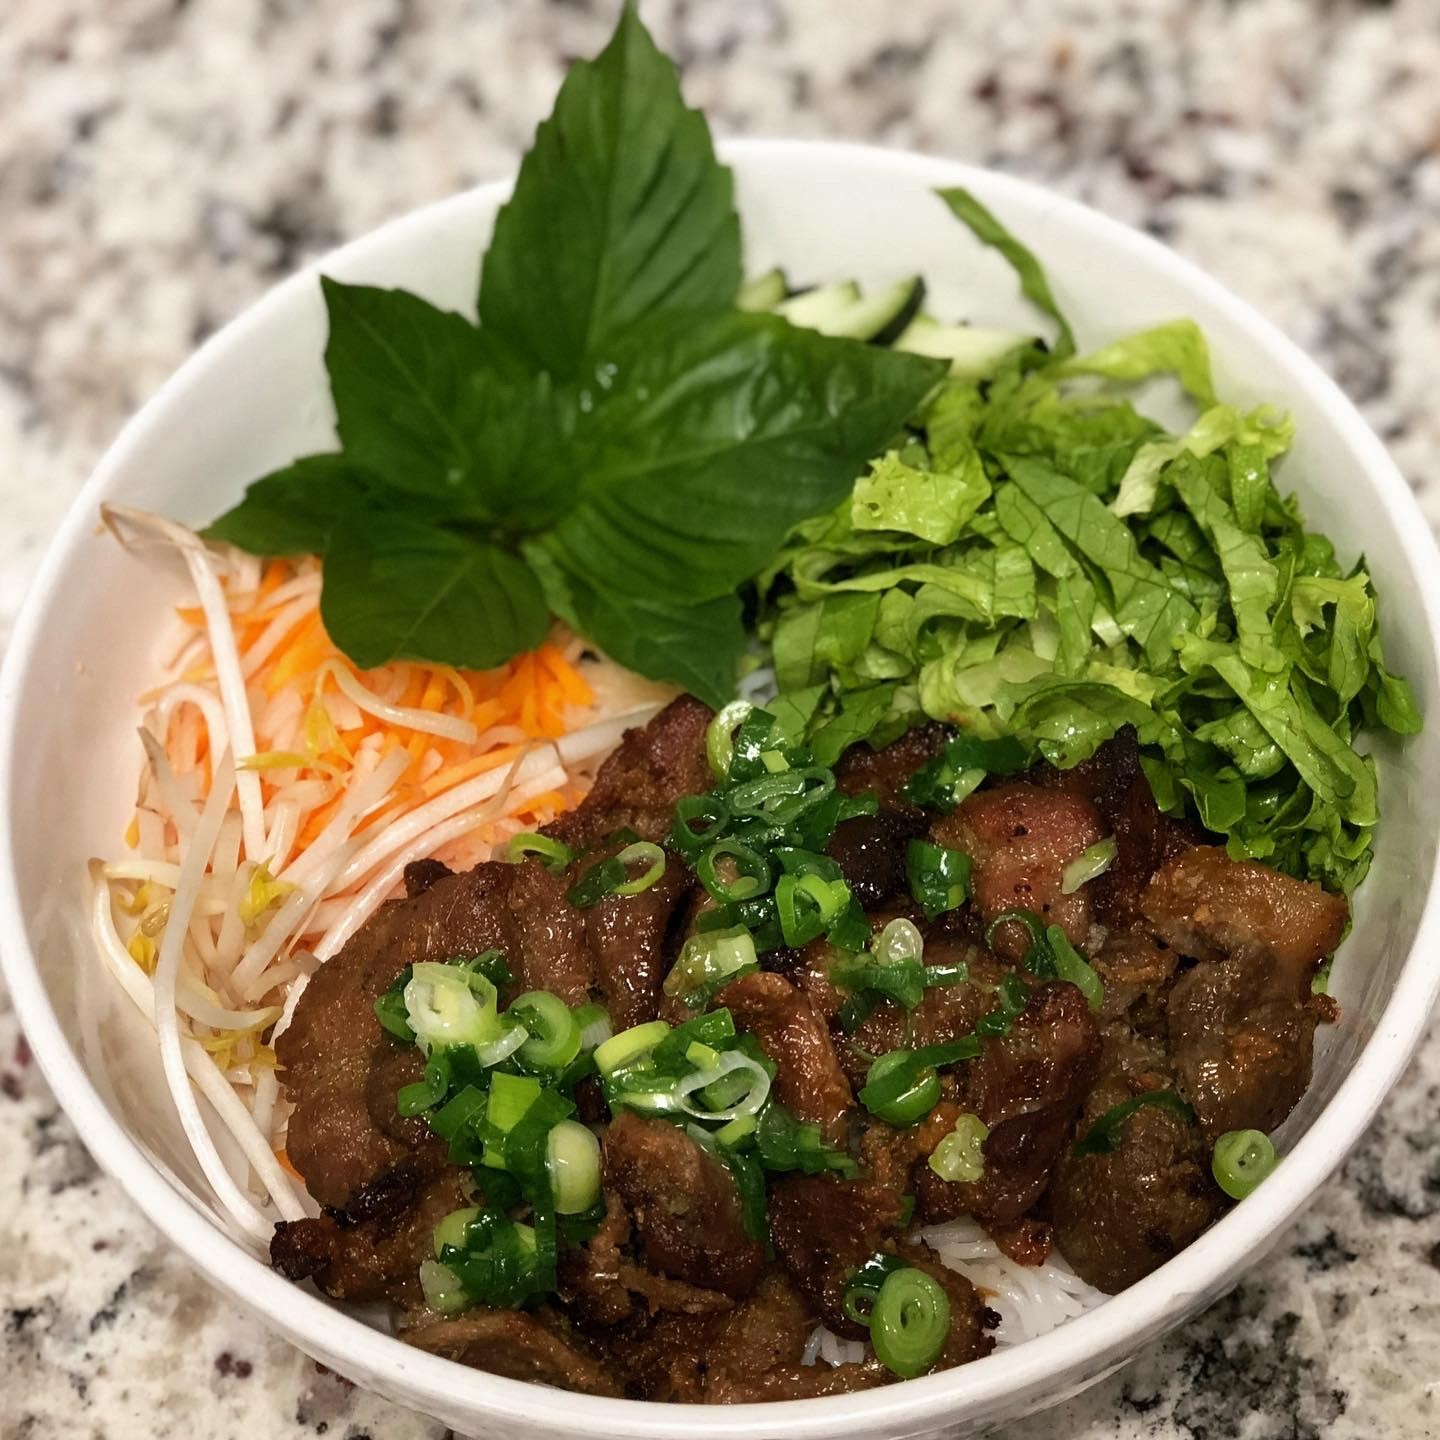 Vermicelli Noodle or Rice Bowl